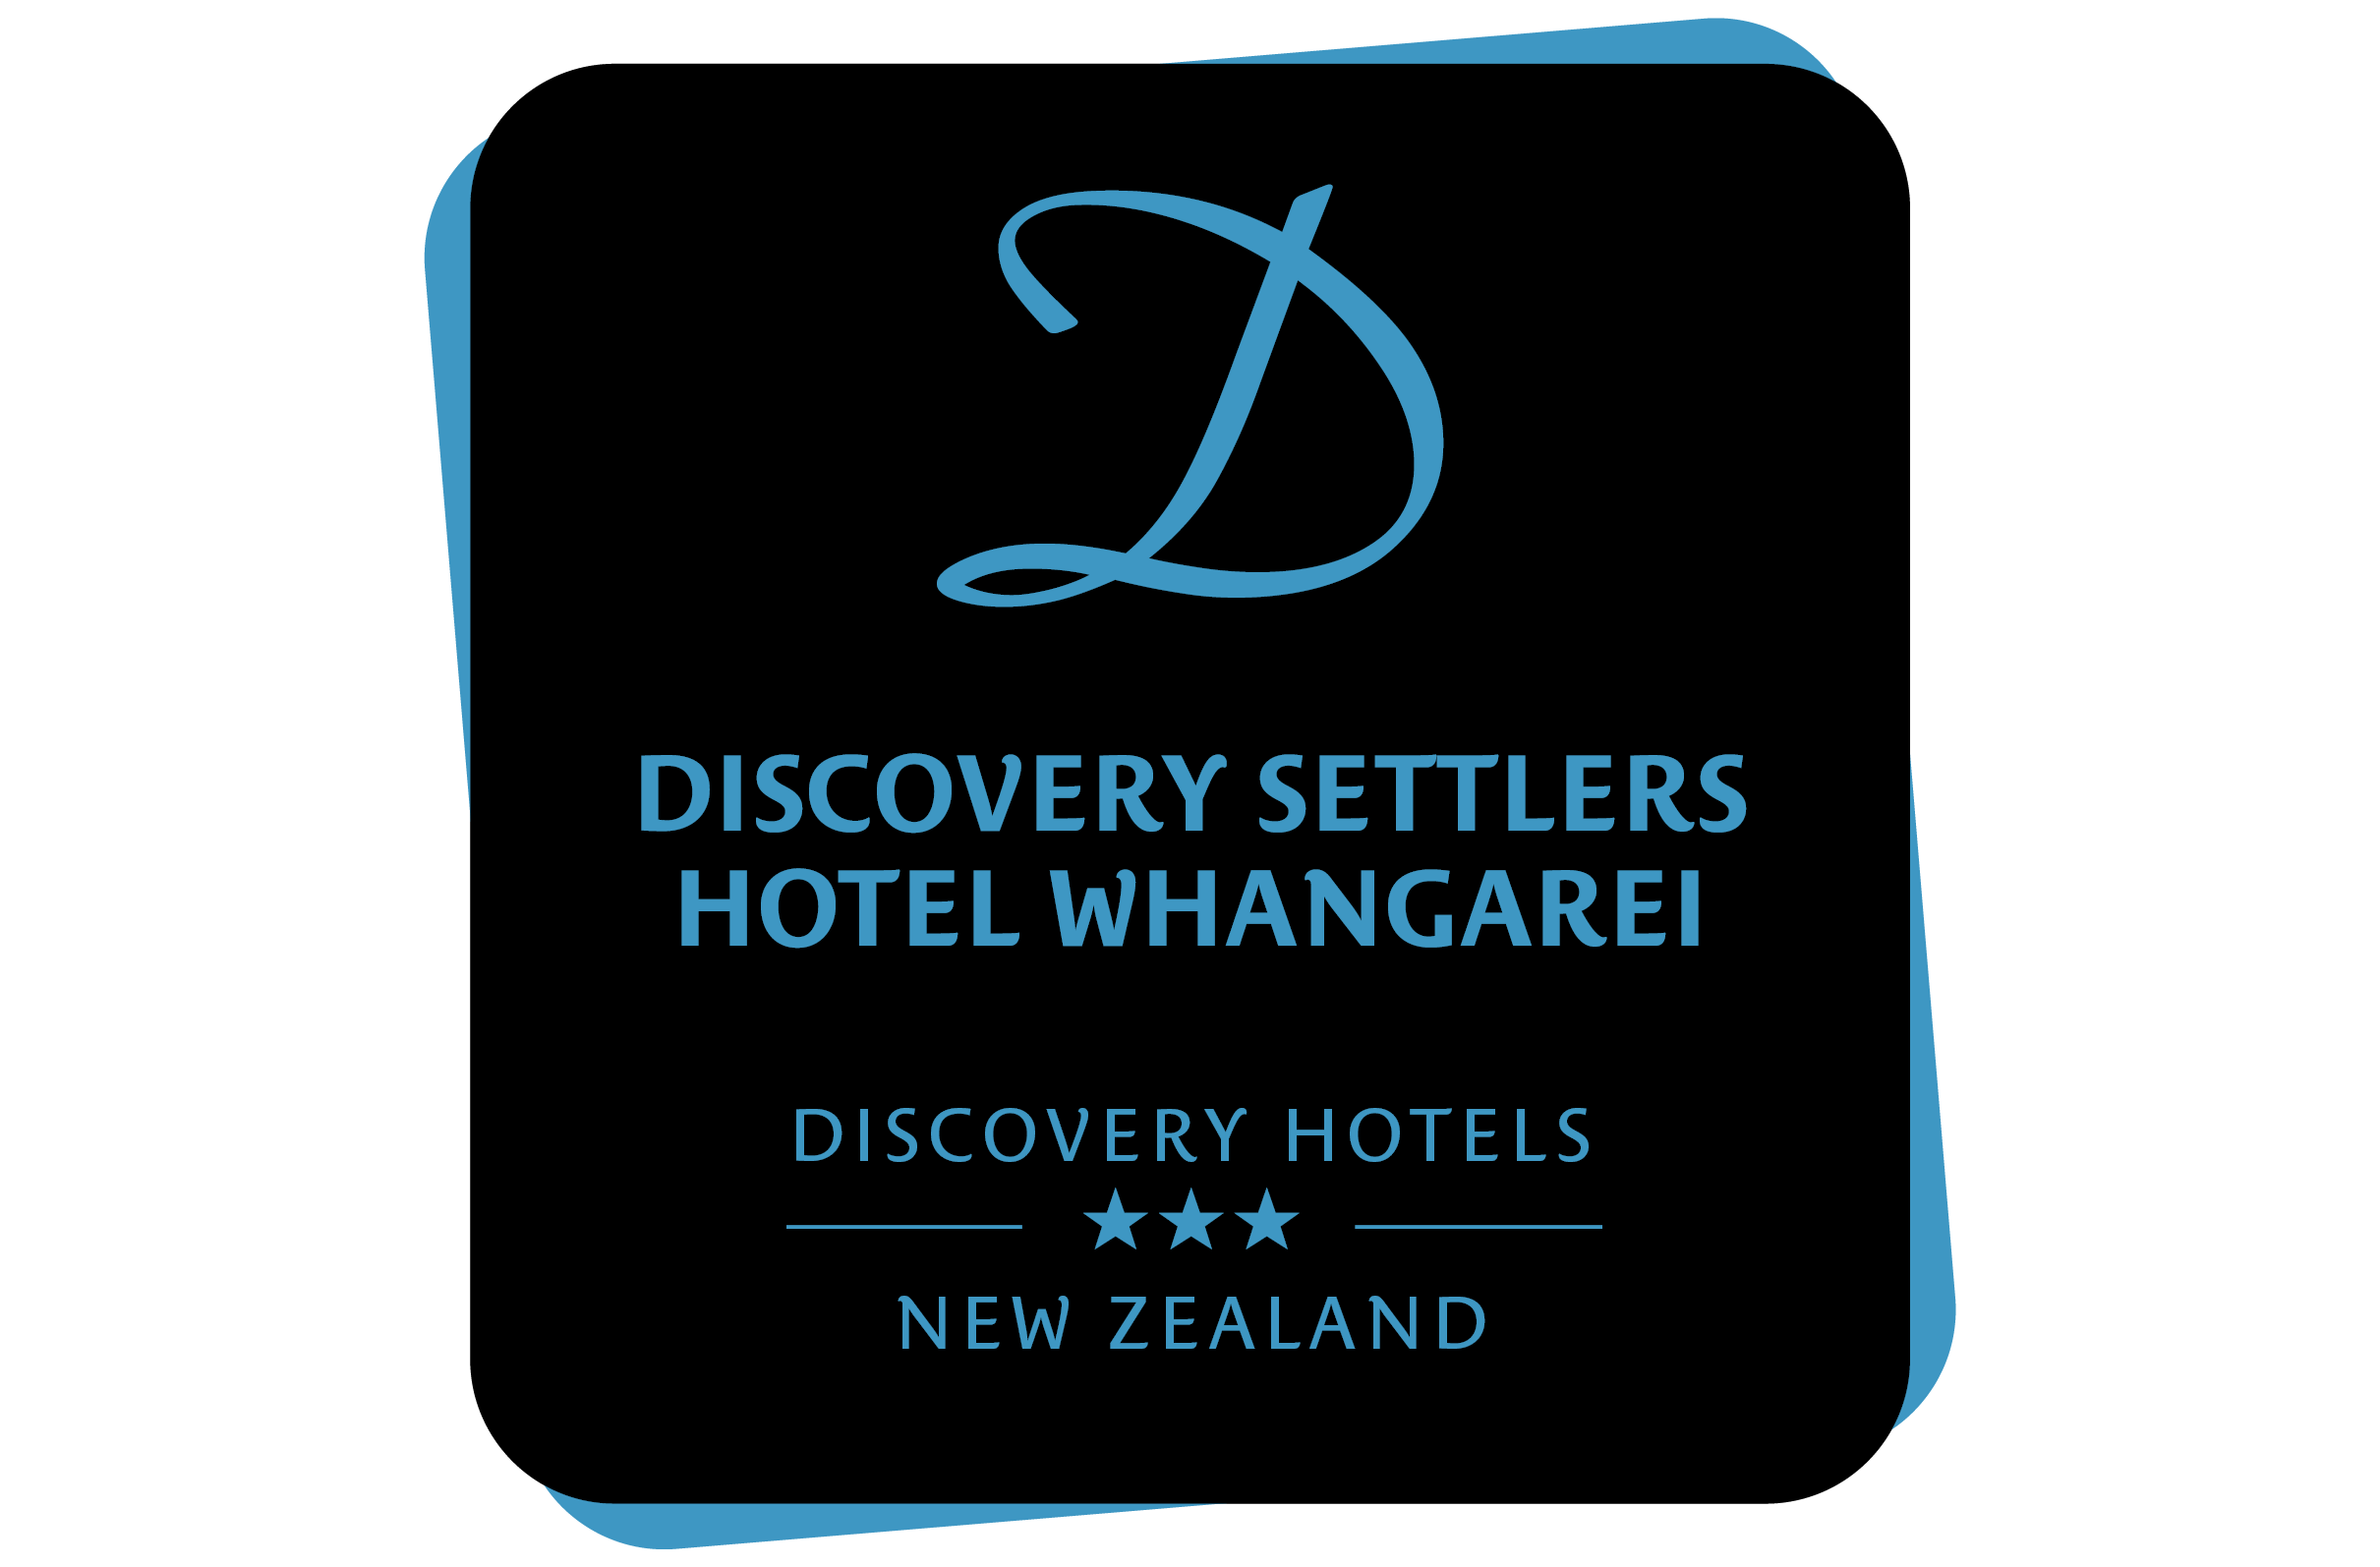 
Discovery Settlers Hotel Whangarei